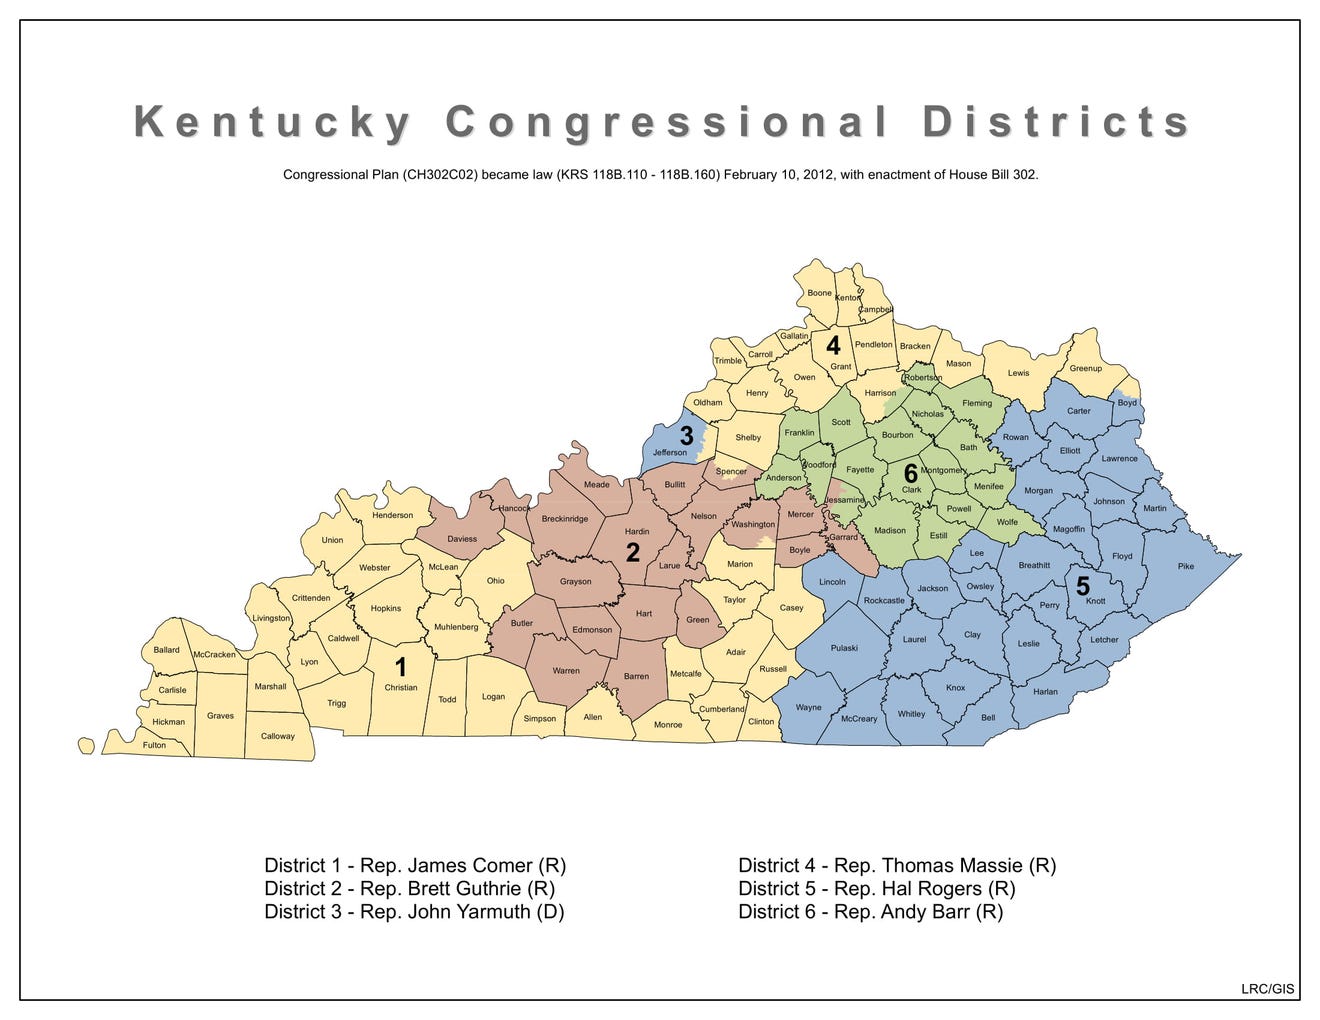 KY Senate GOP unveils redistricting plan for Congress Yarmuth #39 s seat